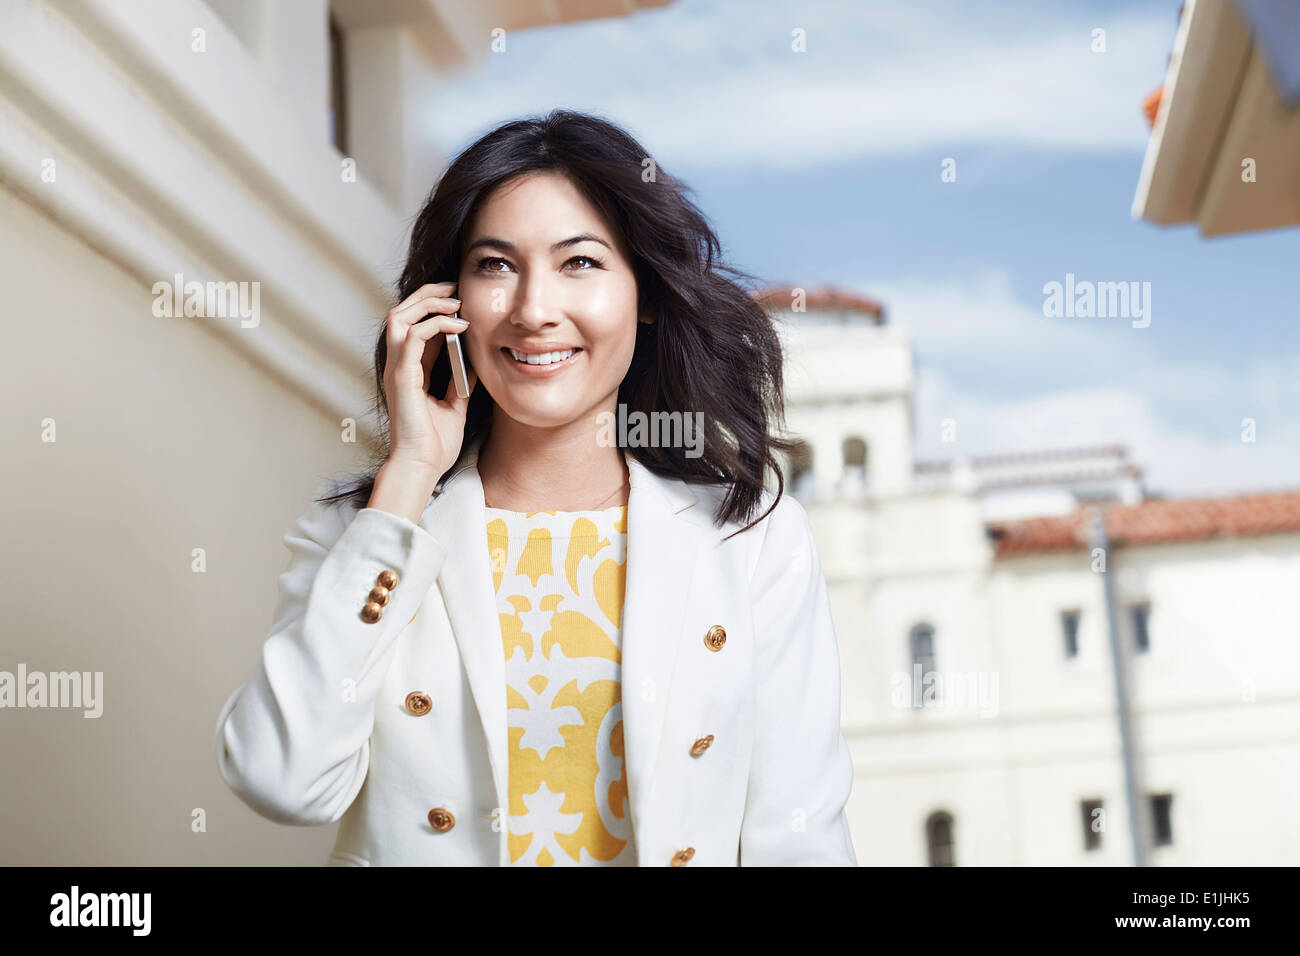 Young woman chatting on smartphone Banque D'Images